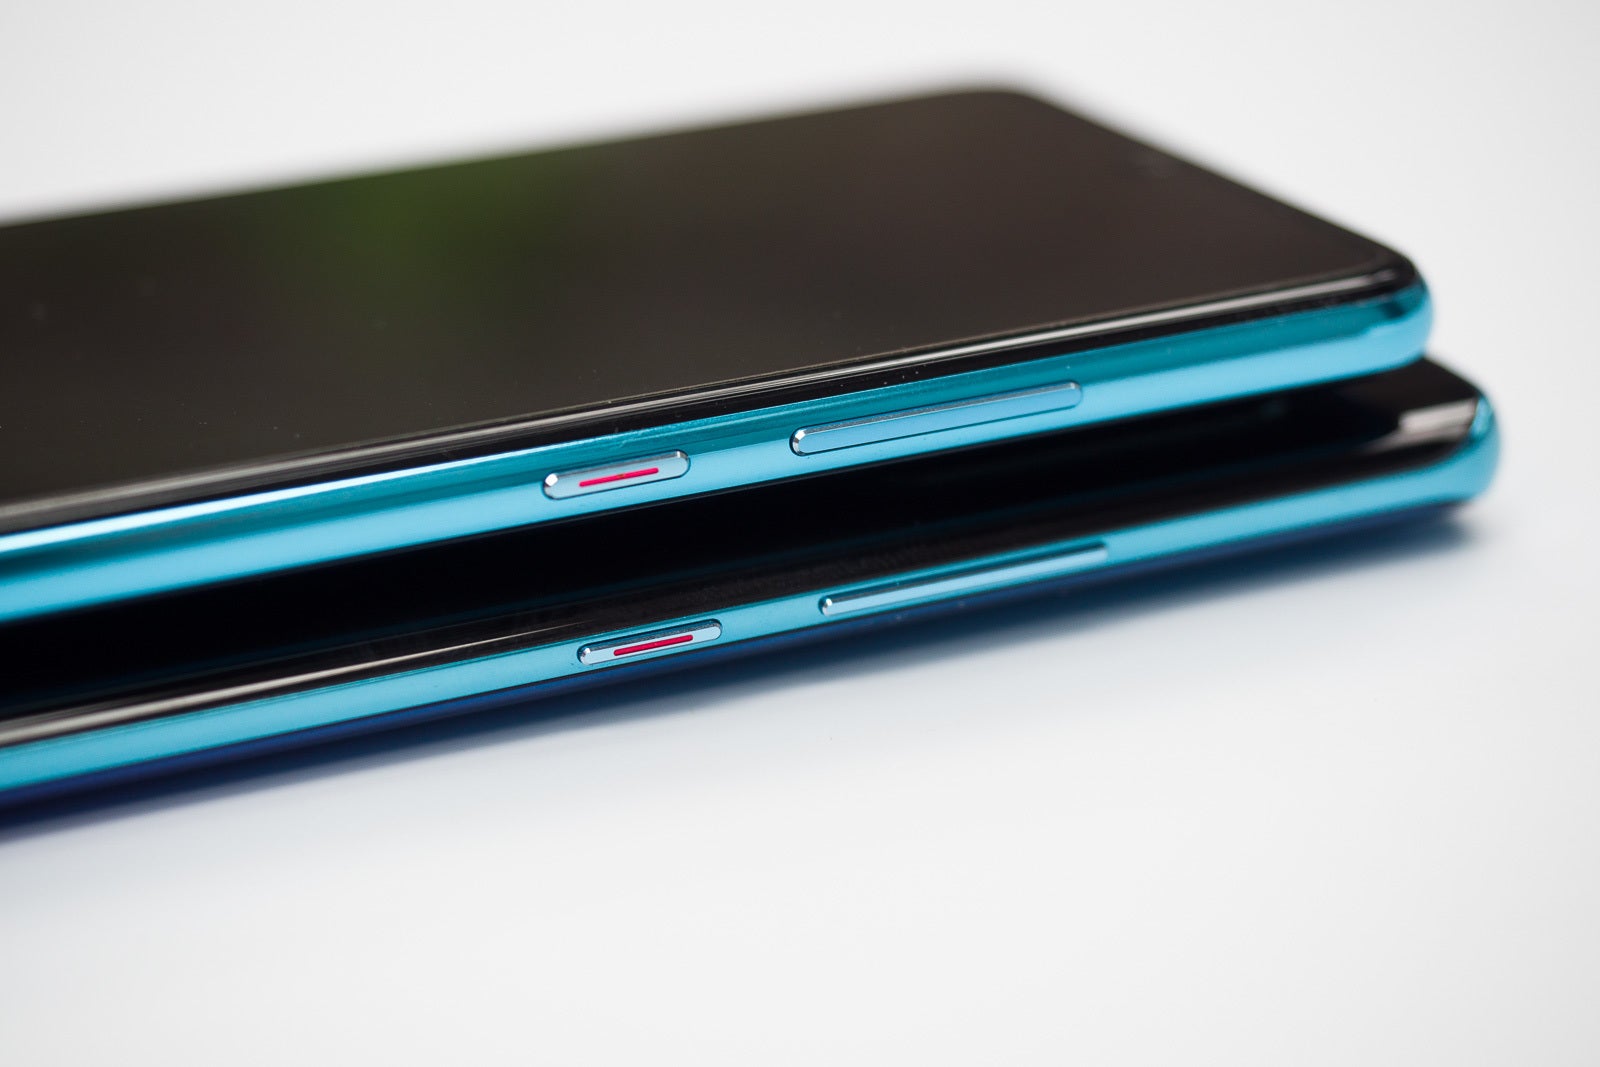 Huawei P30 on the top, P30 Pro -- on the bottom - Huawei P30 Review